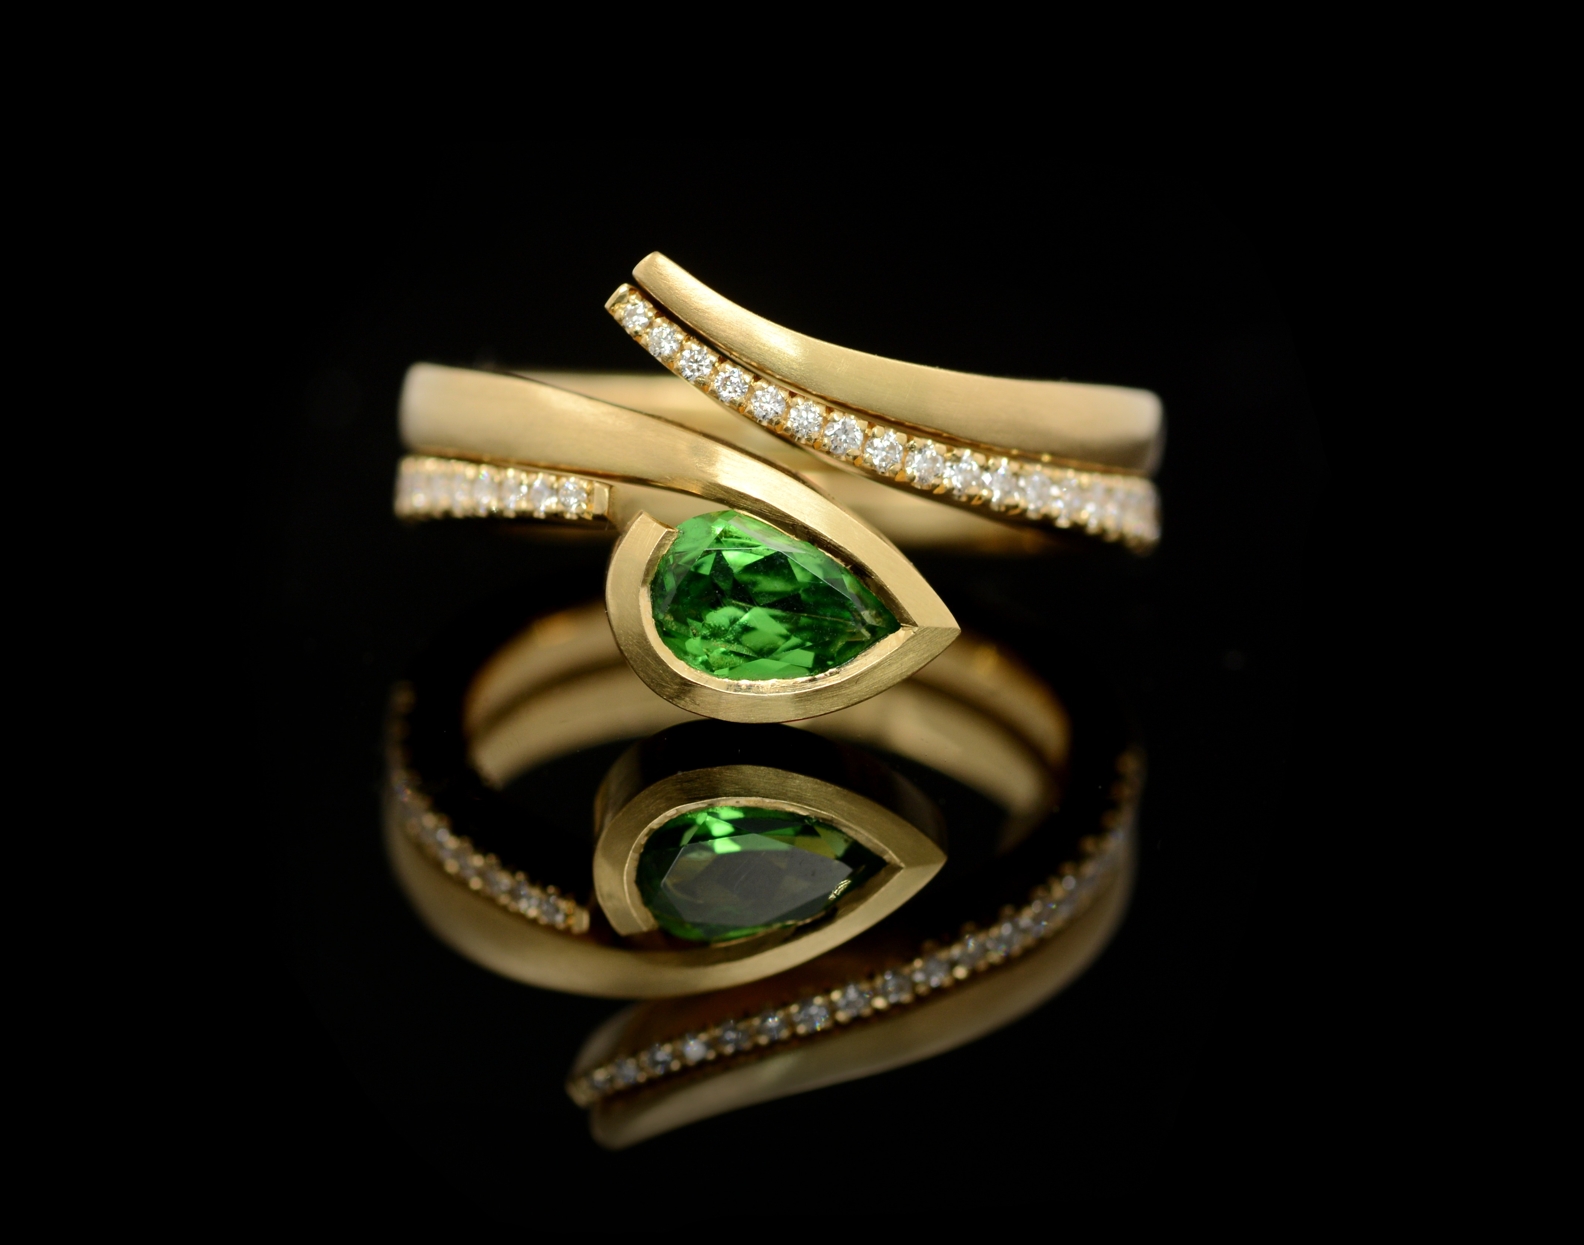 Green garnet, diamond and yellow gold engagement ring commission with fitted wedding band